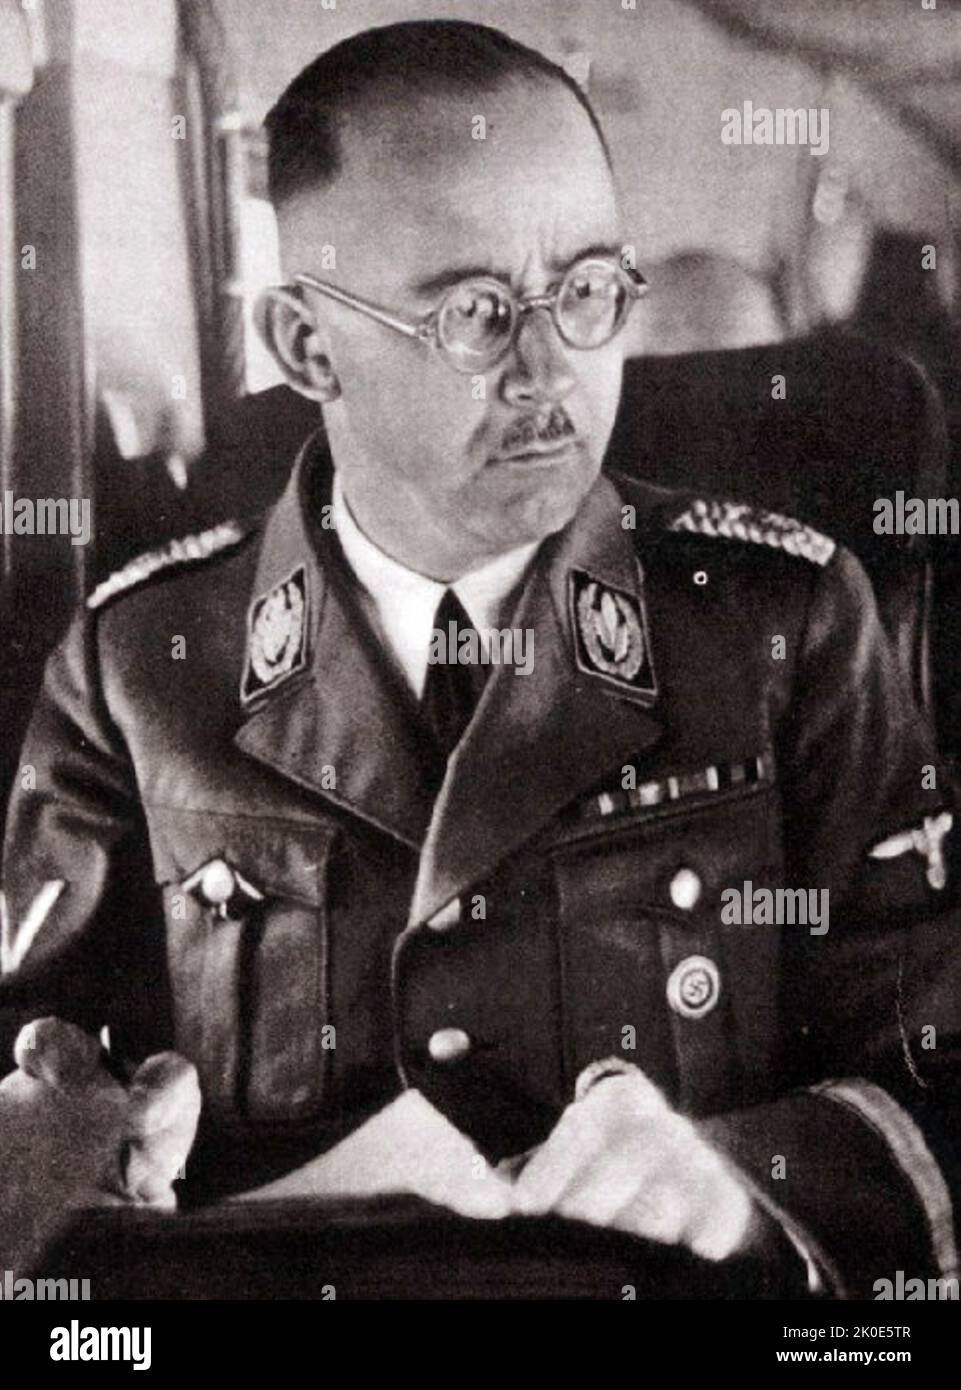 Heinrich Luitpold Himmler (1900 - 1945) Reichsfuhrer of the Schutzstaffel (SS), and a leading member of the Nazi Party (NSDAP) of Germany. Himmler was one of the most powerful men in Nazi Germany and a main architect of the Holocaust. Stock Photo